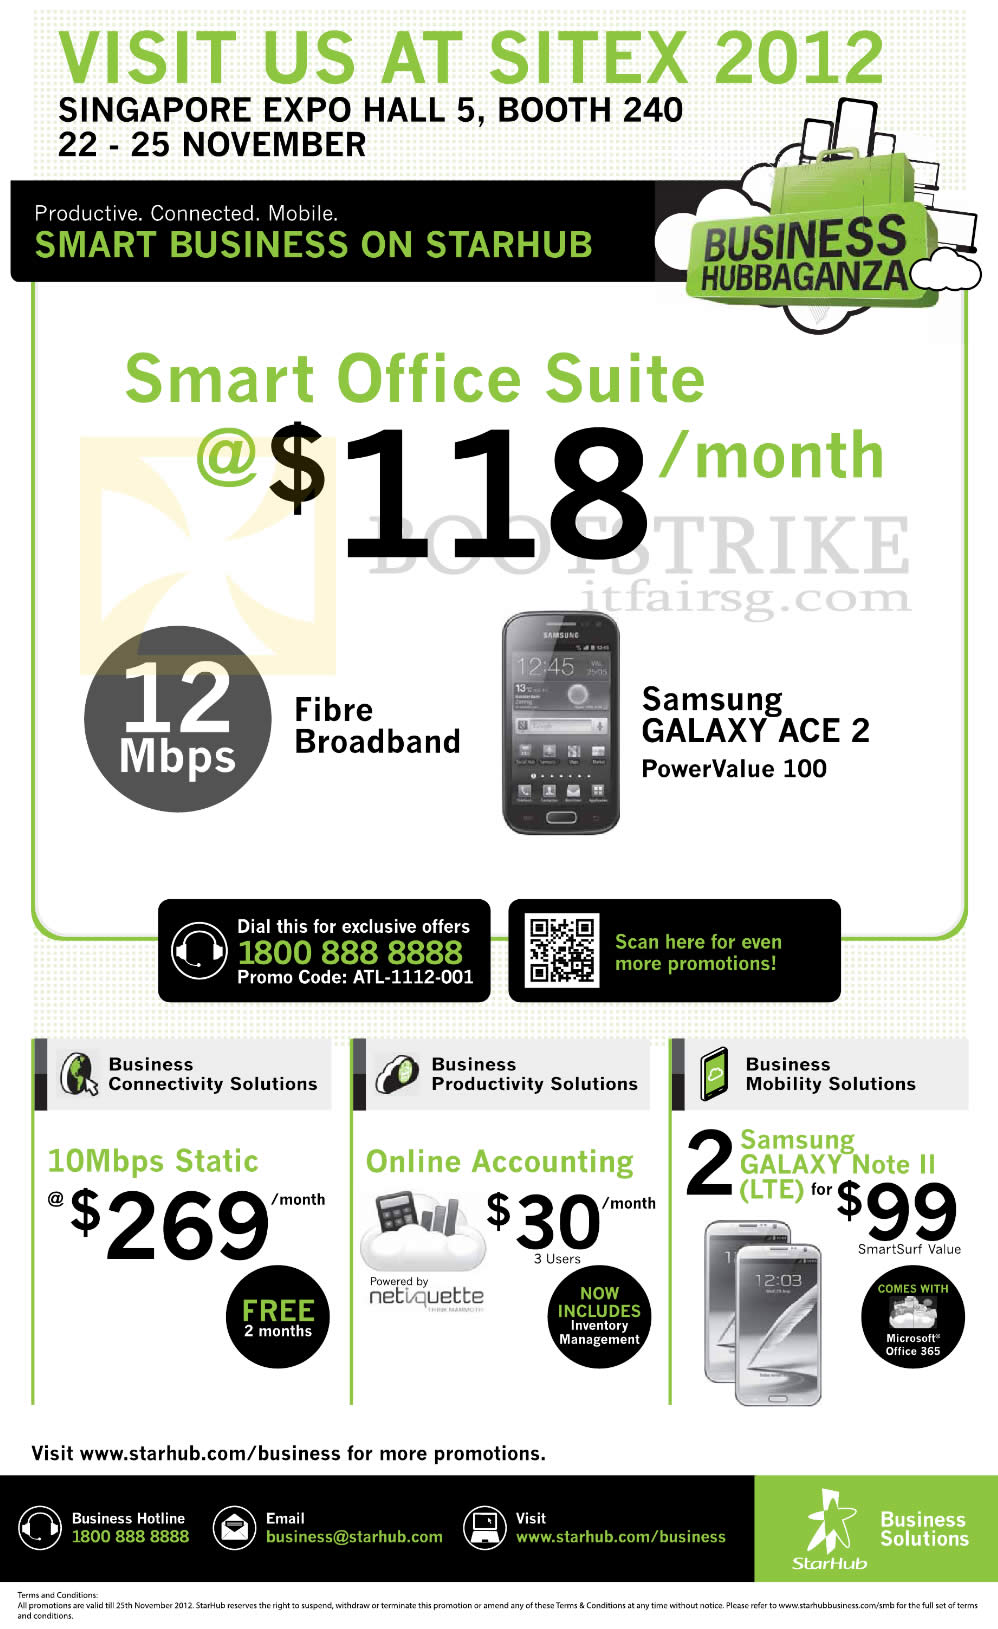 SITEX 2012 price list image brochure of Starhub Business Smart Office Suite, 12Mbps Fibre Broadband, Samsung Galaxy Ace 2, Note II LTE, 10Mbps, Online Accounting